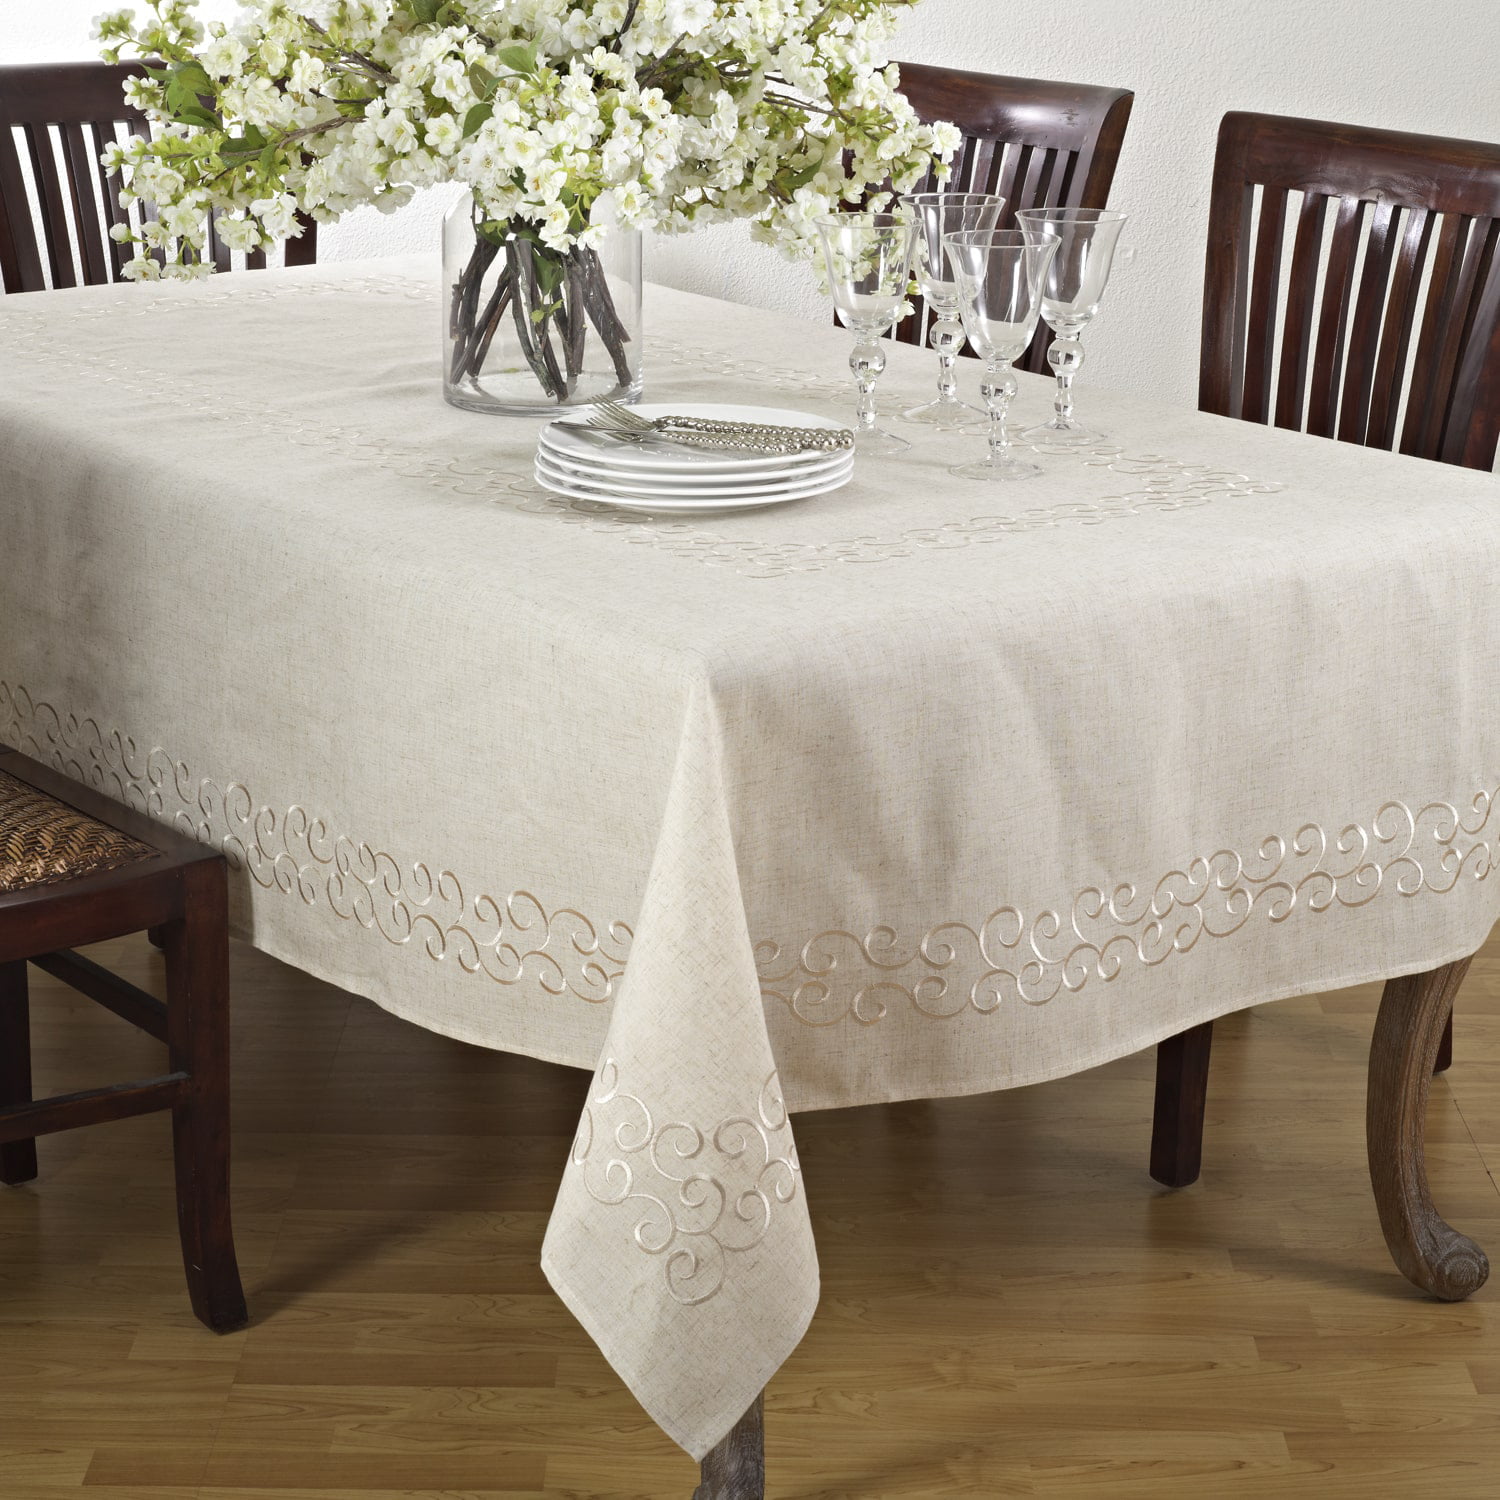 36x36" Square Embroidered Tablecloth Polyester Embroidery Table Cover Beige